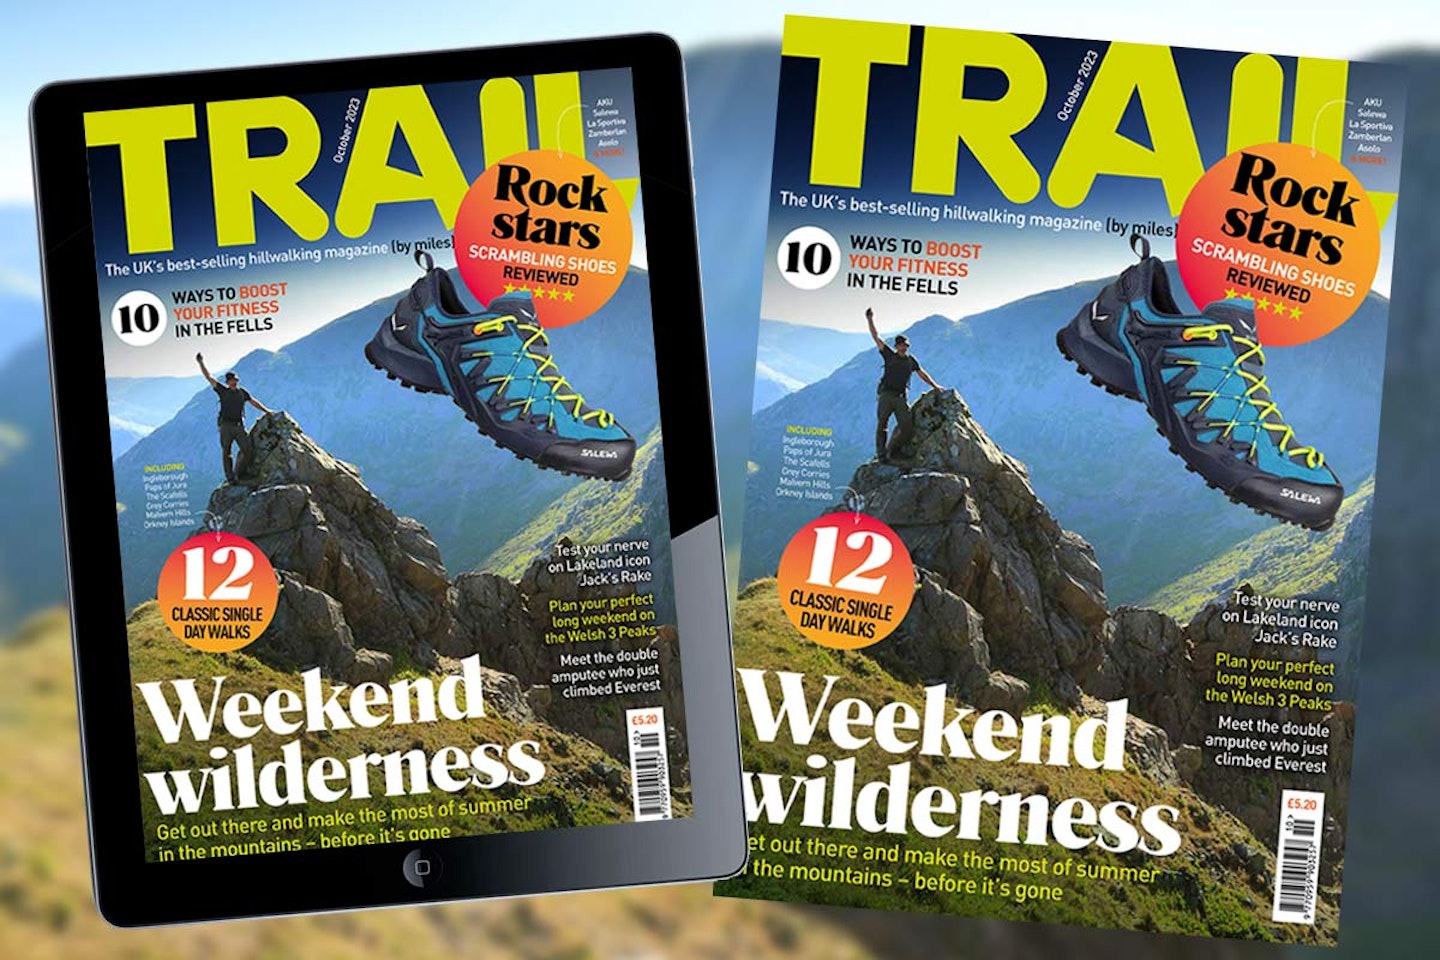 Trail magazine in digital and print format